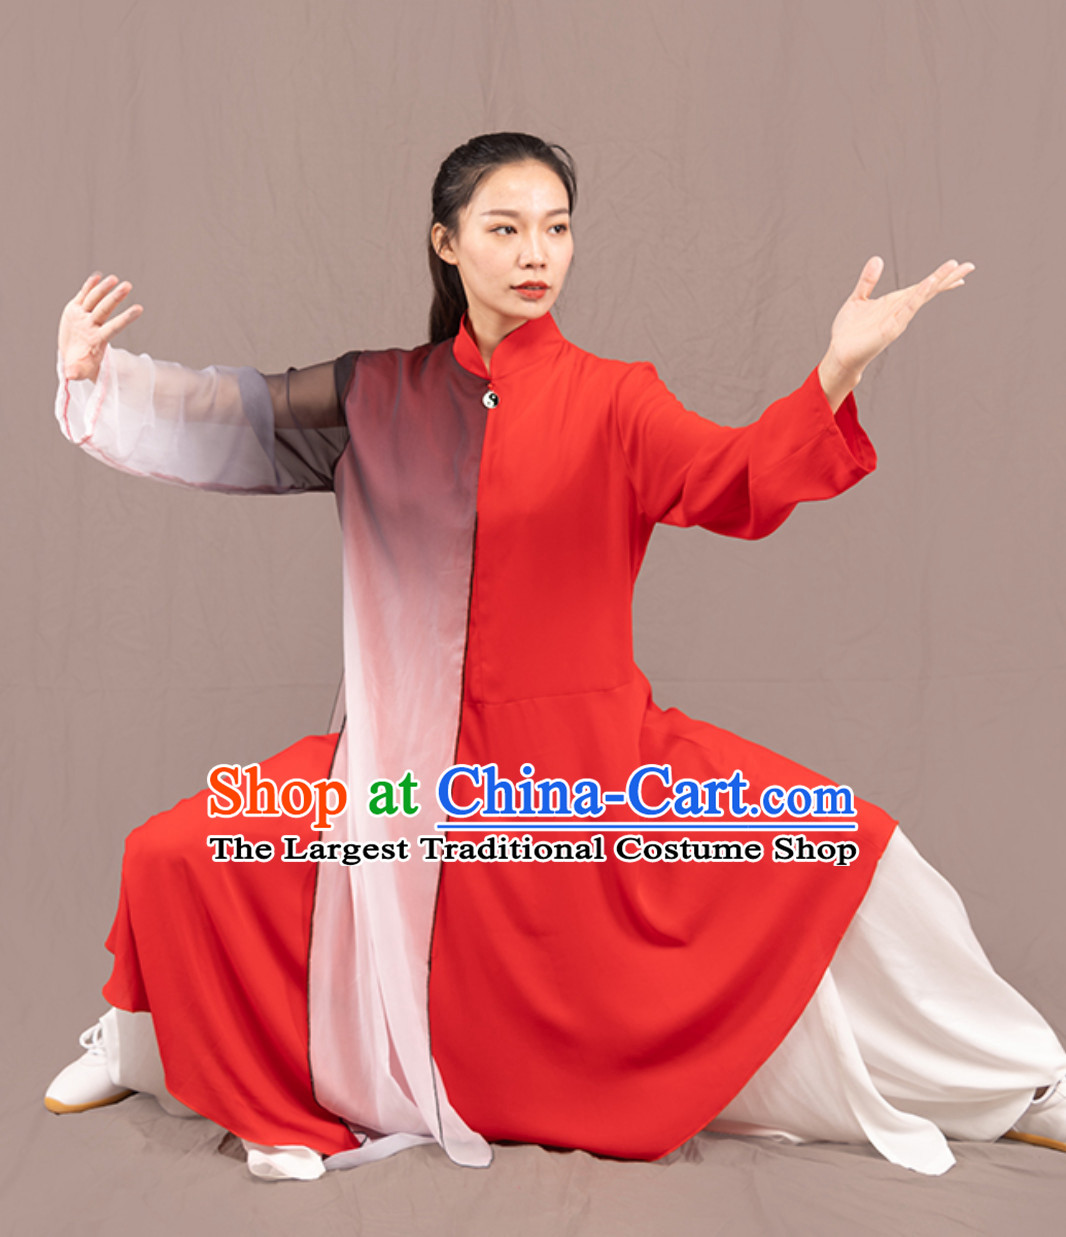 Top Chinese Traditional Competition Championship Tai Chi Taiji Kung Fu Uniforms Master Dresses Complete Set